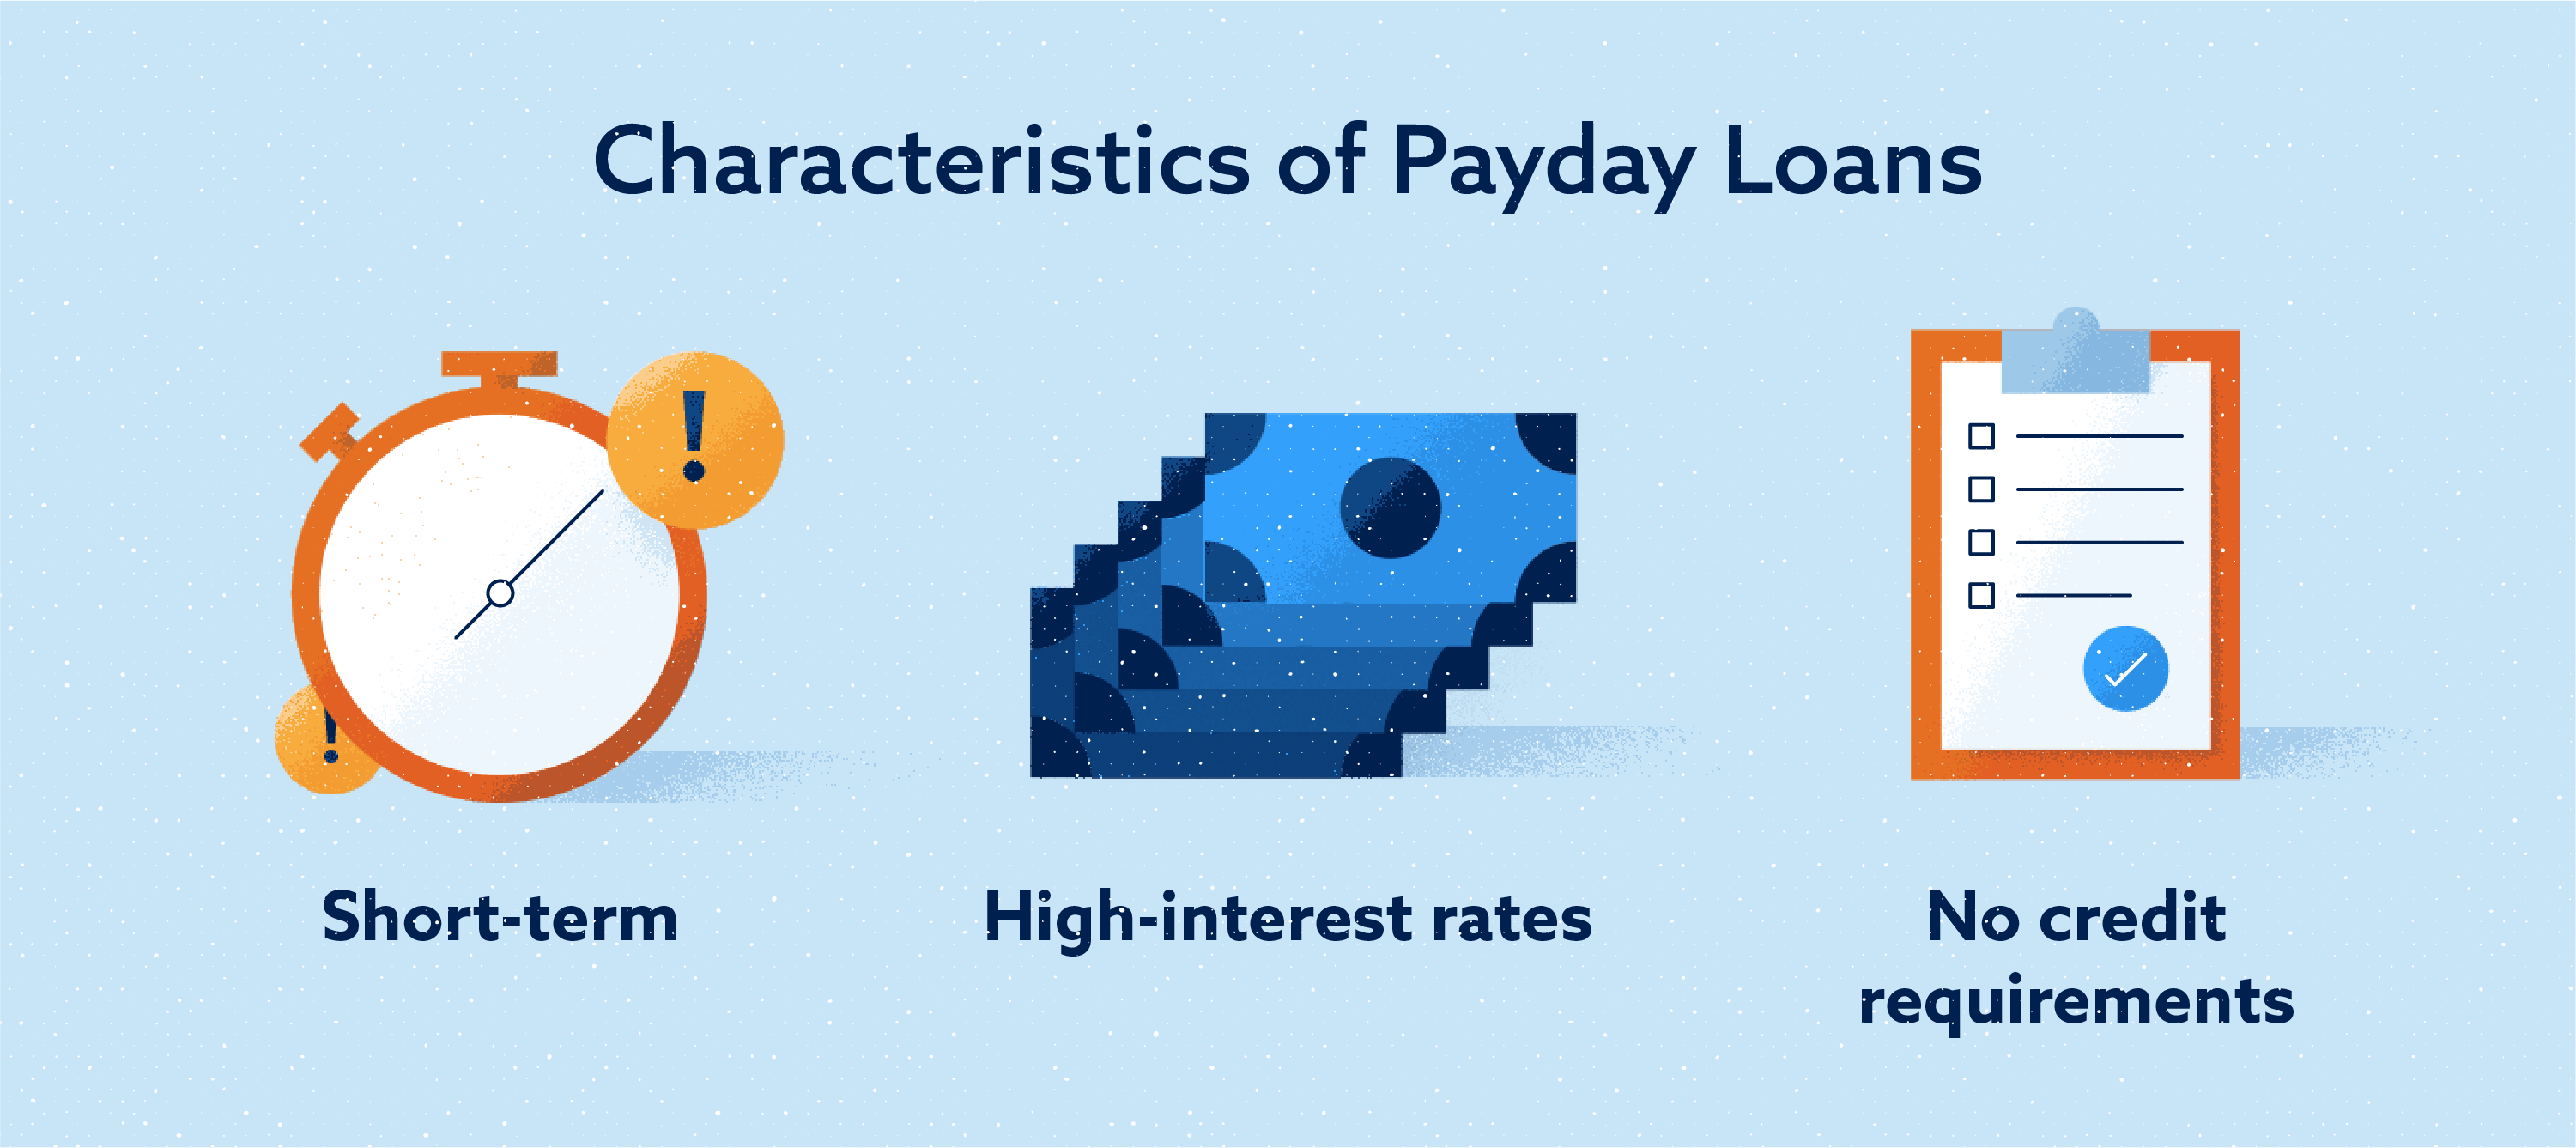 Are Payday Loans Bad?